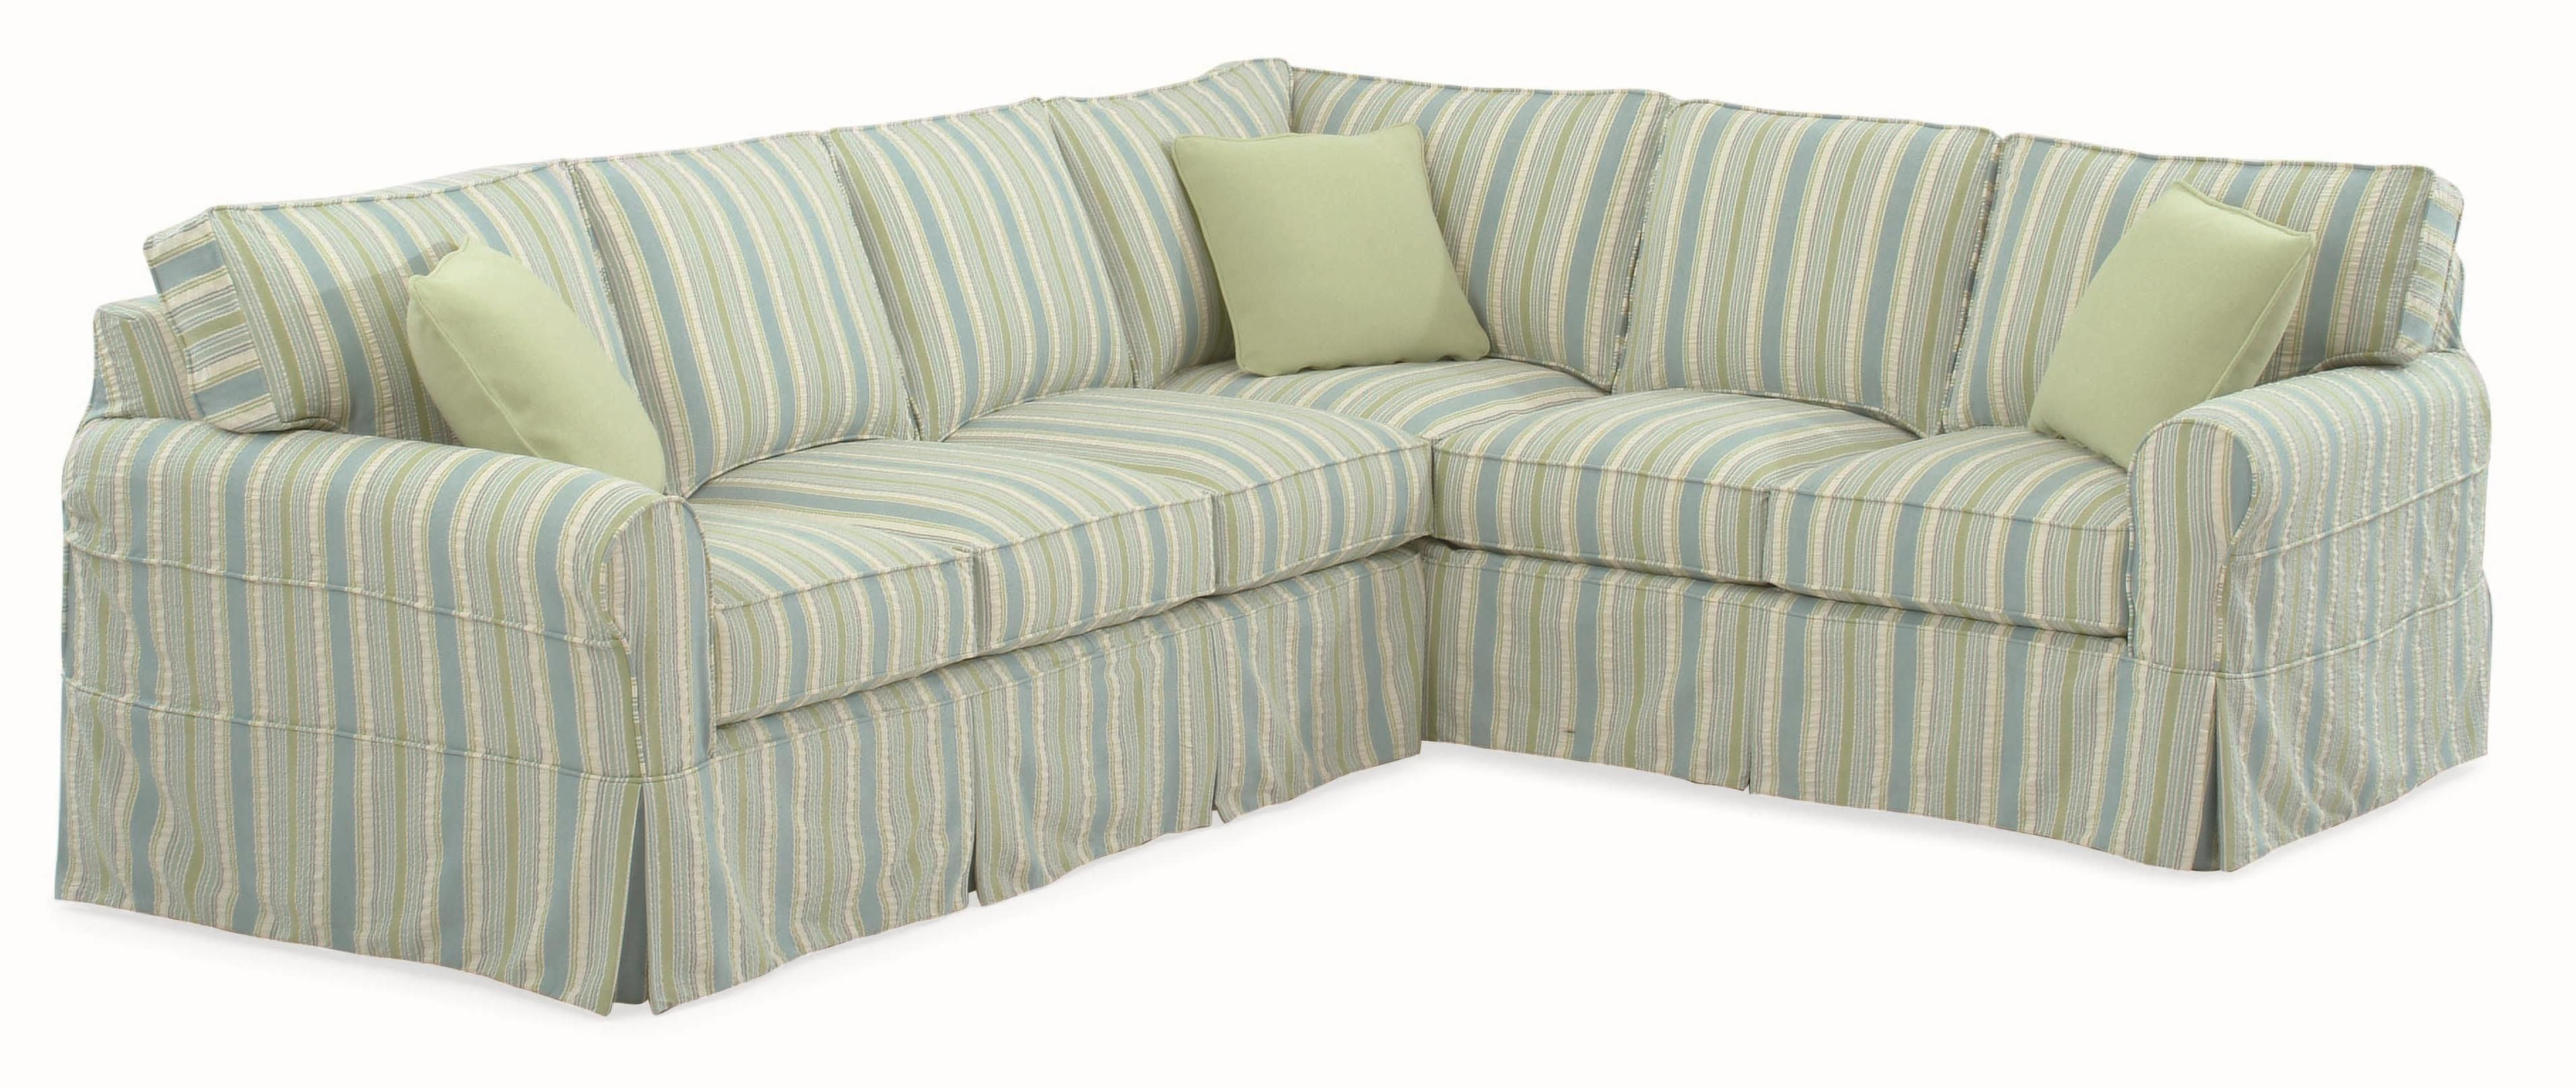 Amazing Sectional Sofas Havertys 31 For Sectional Sofas Rooms To Go Throughout Havertys Sectional Sofas (View 10 of 10)